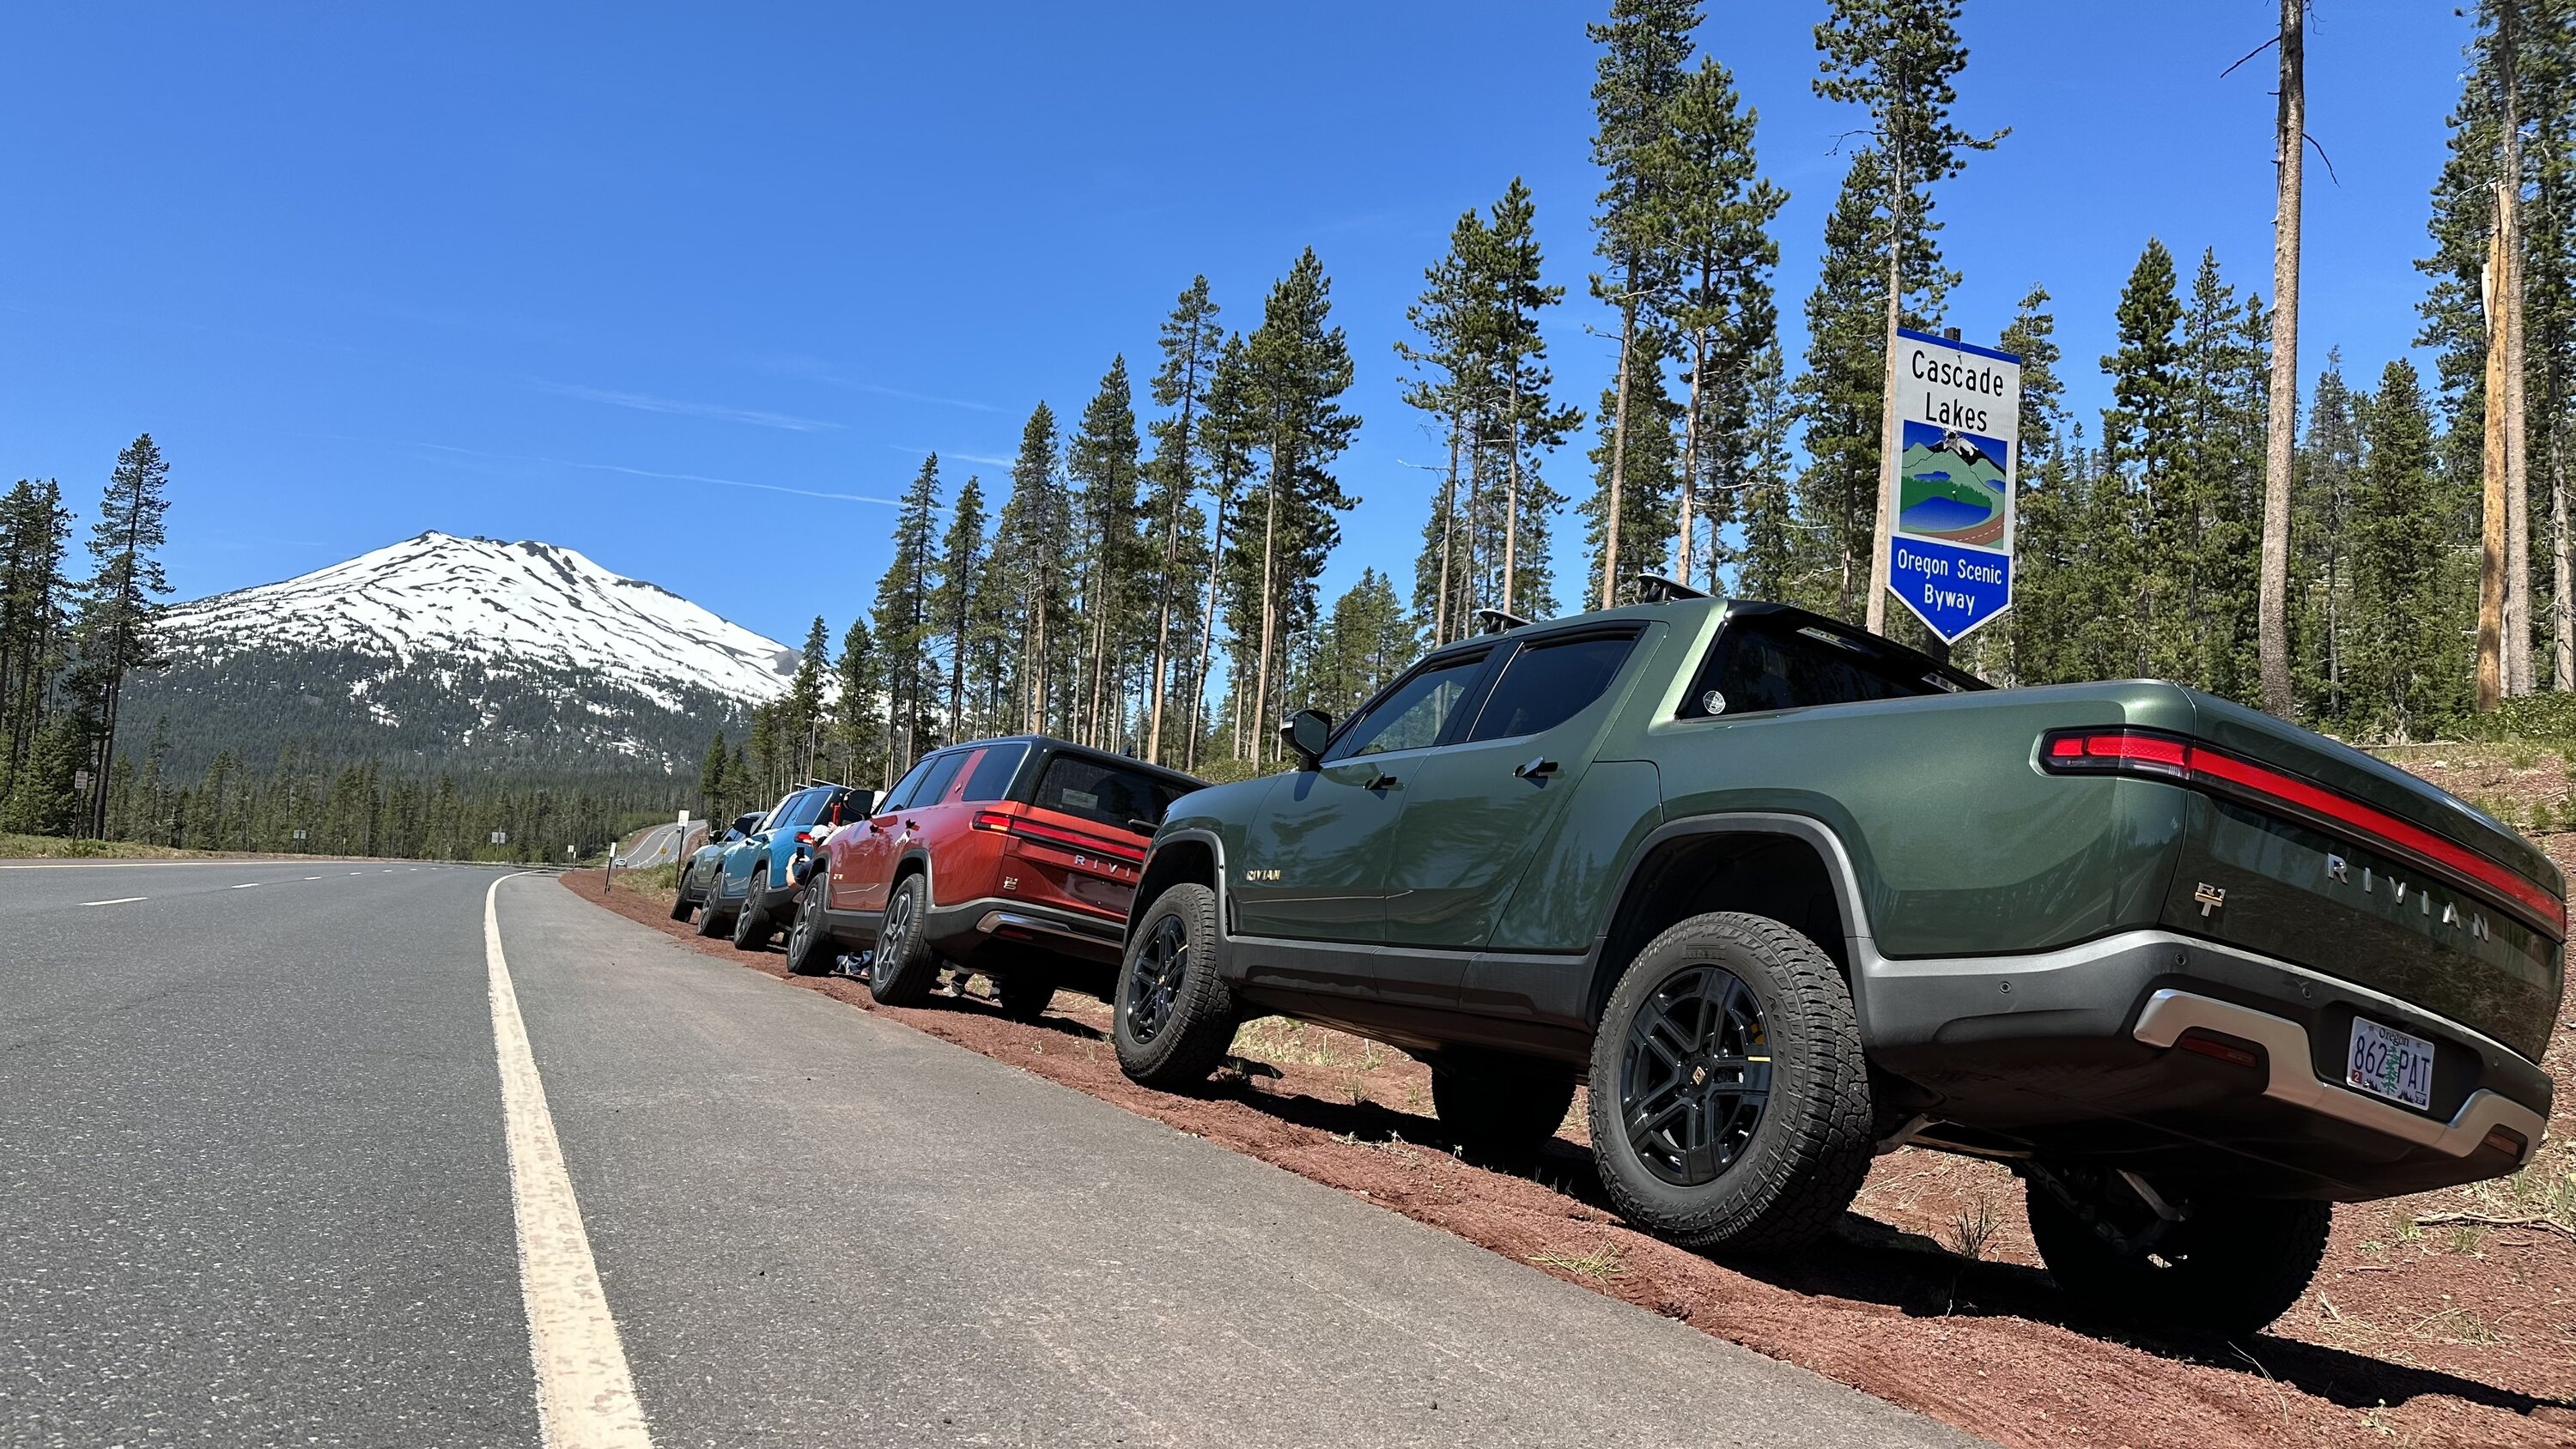 Rivian R1T R1S Keeping Central Oregon Beautiful: CORC’s first Adopt-a-Highway cleanup on the Cascade Lakes Highway IMG_9779